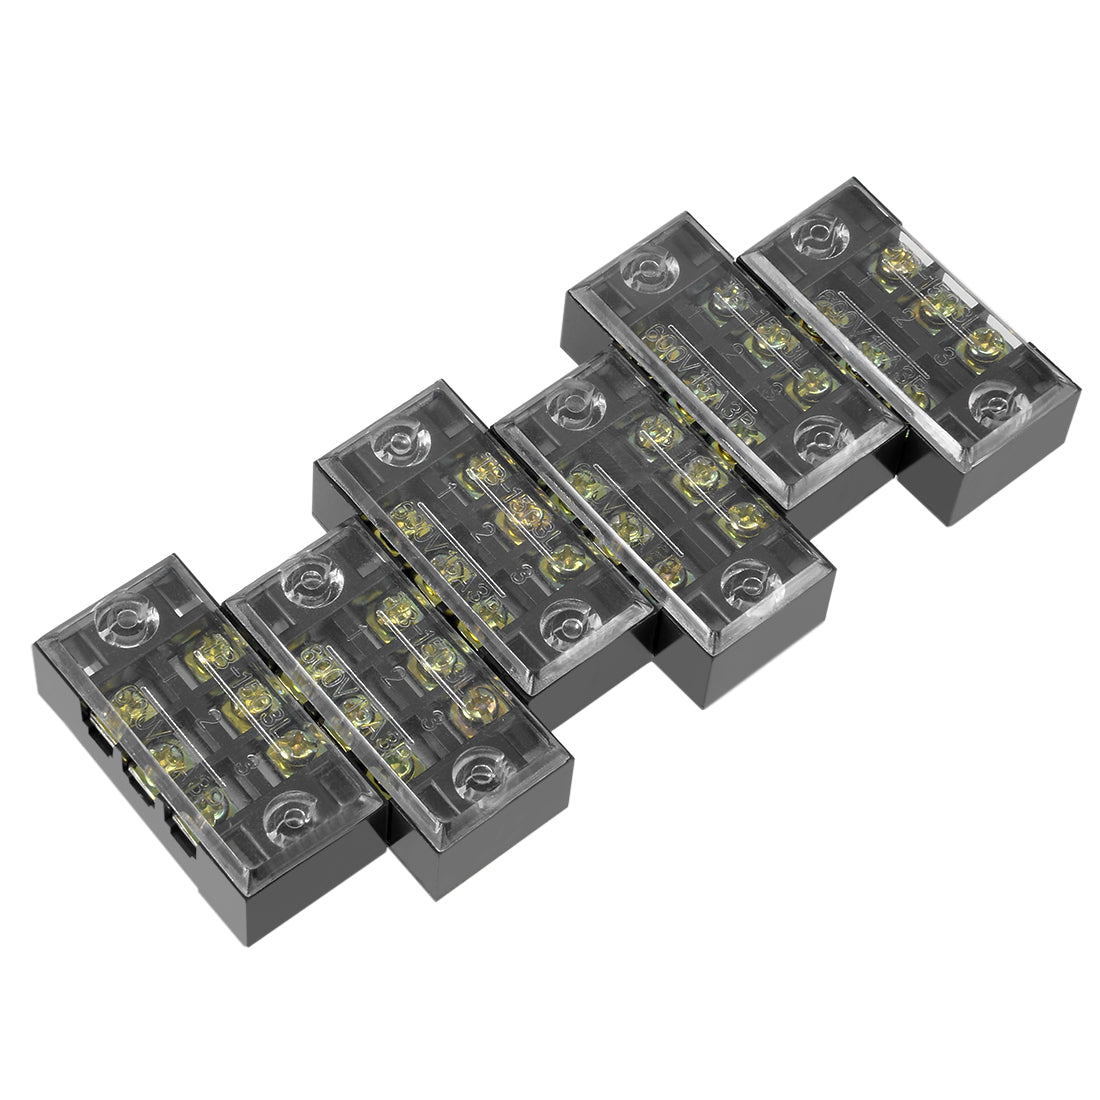 uxcell Uxcell 6 Pcs Dual Rows 3 Positions 600V 15A Cable Barrier Block Terminal Strip TB-1503L